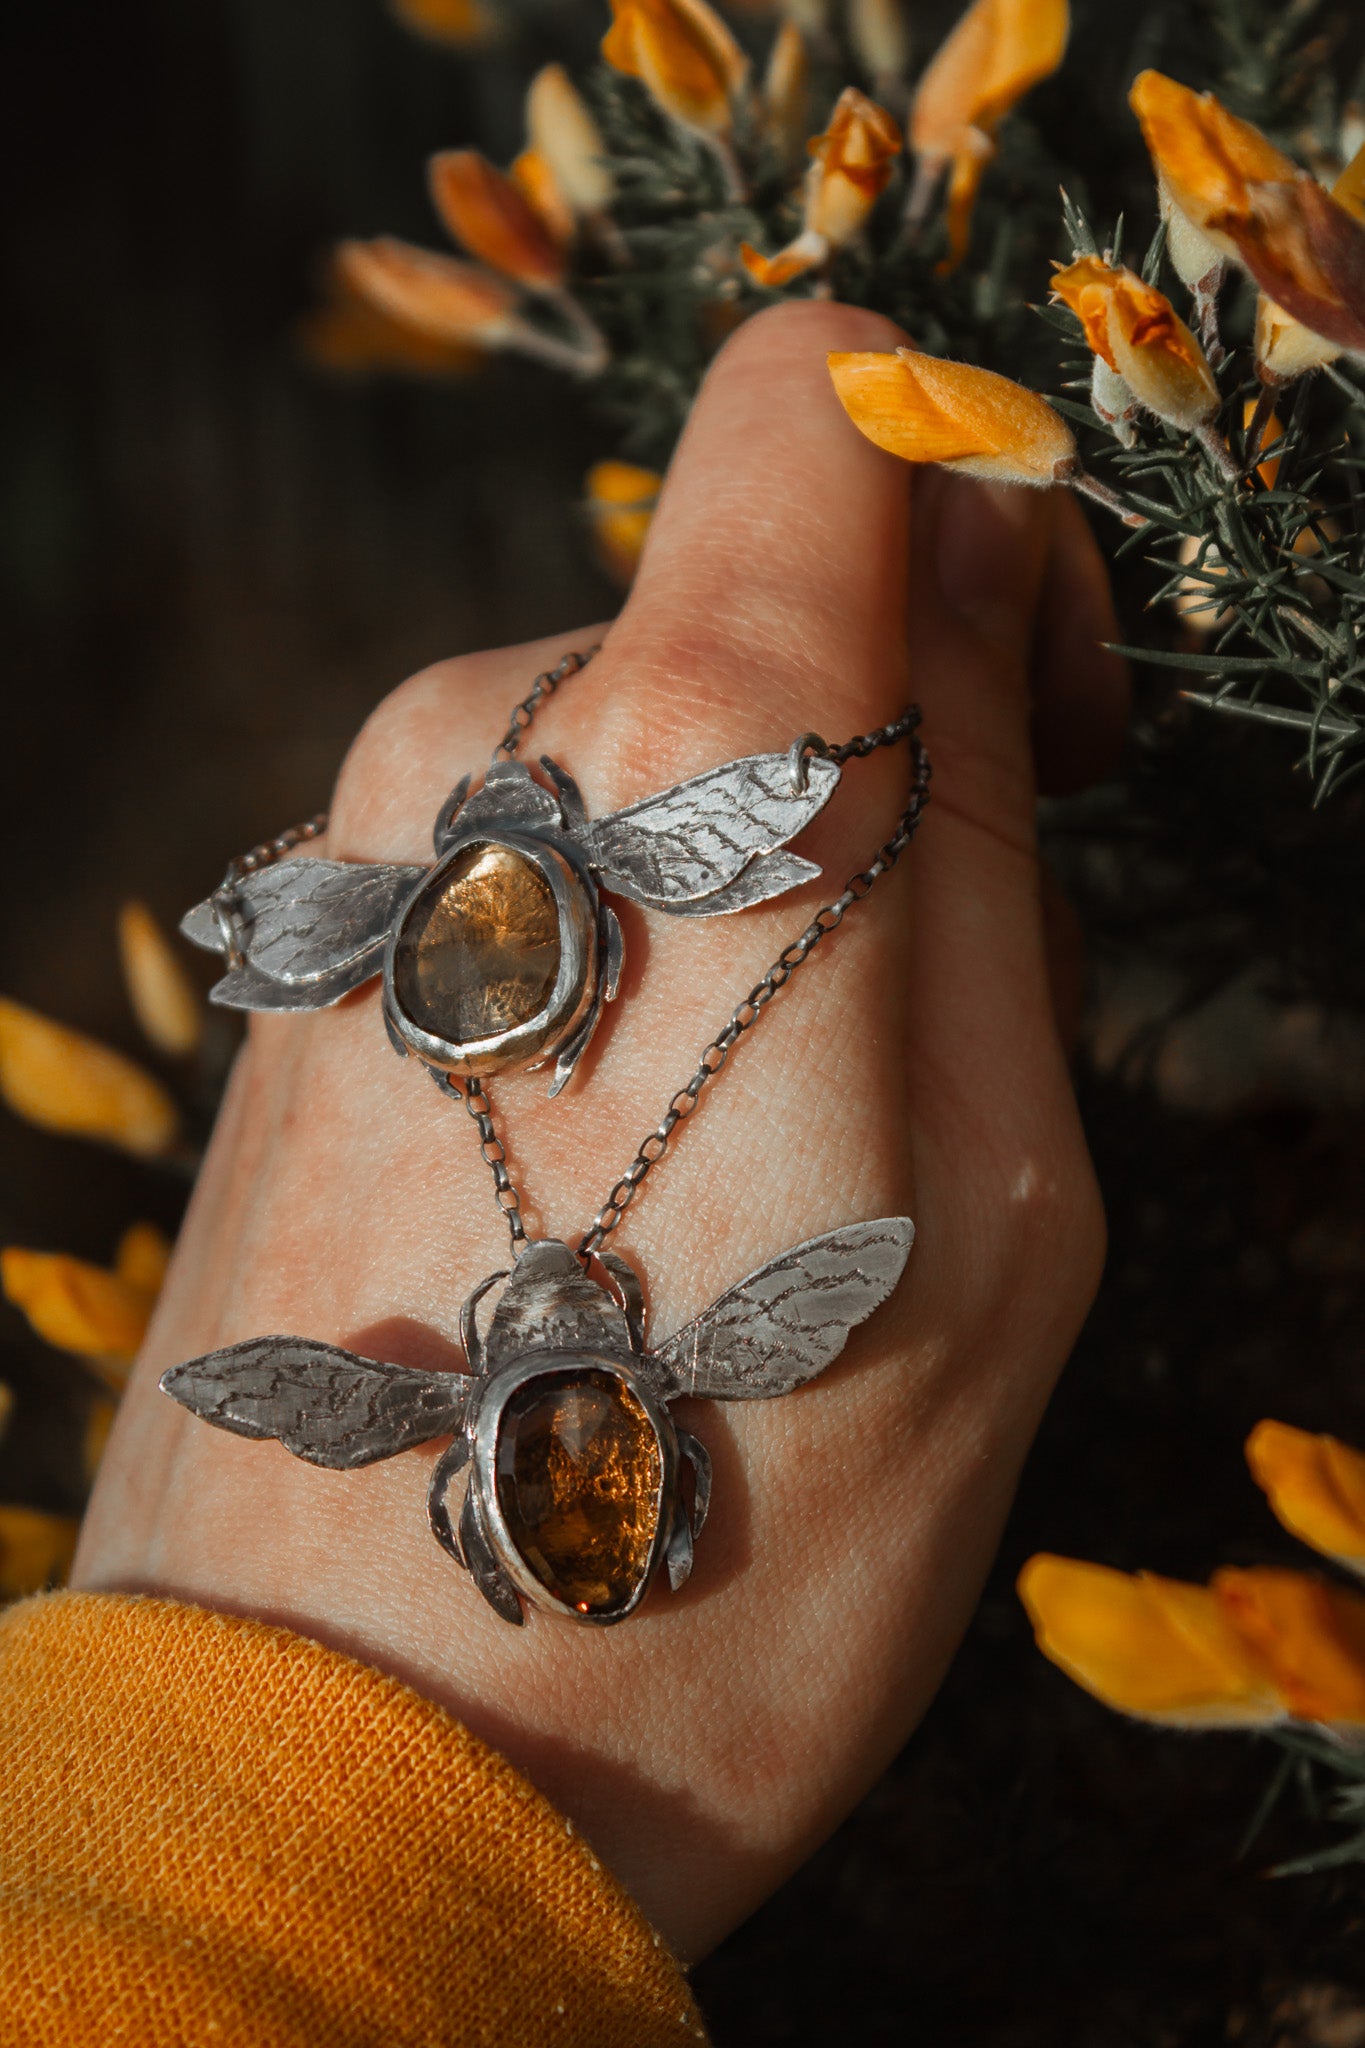 Buzzy Bee collection